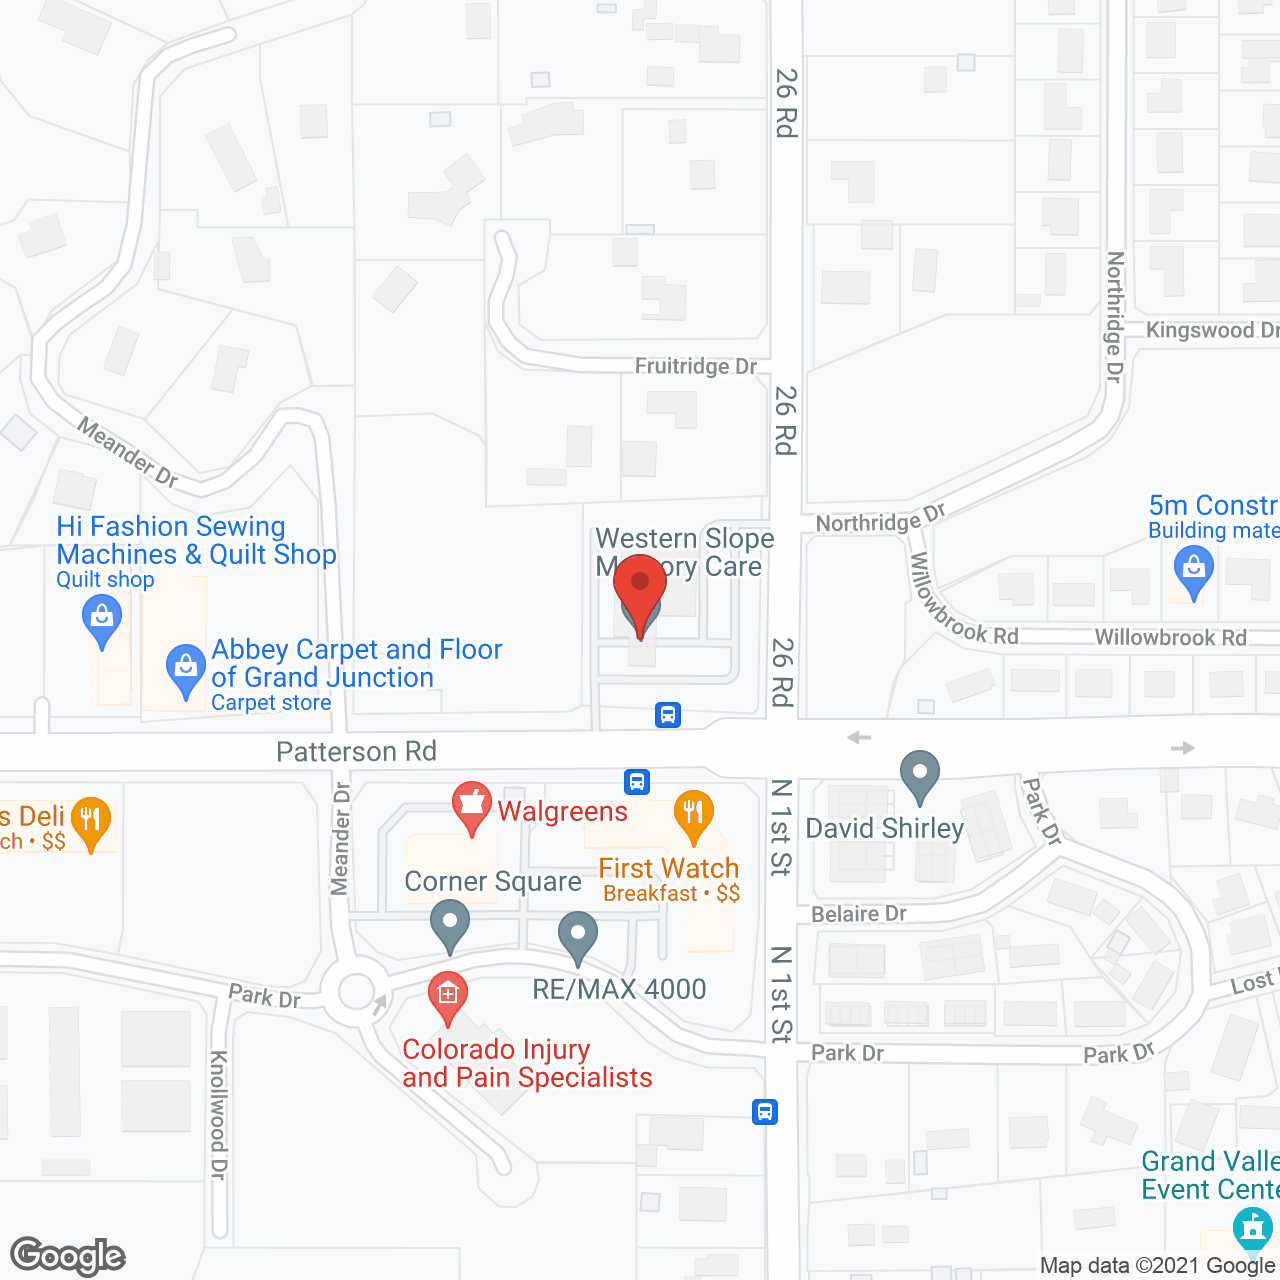 Western Slope Memory Care in google map